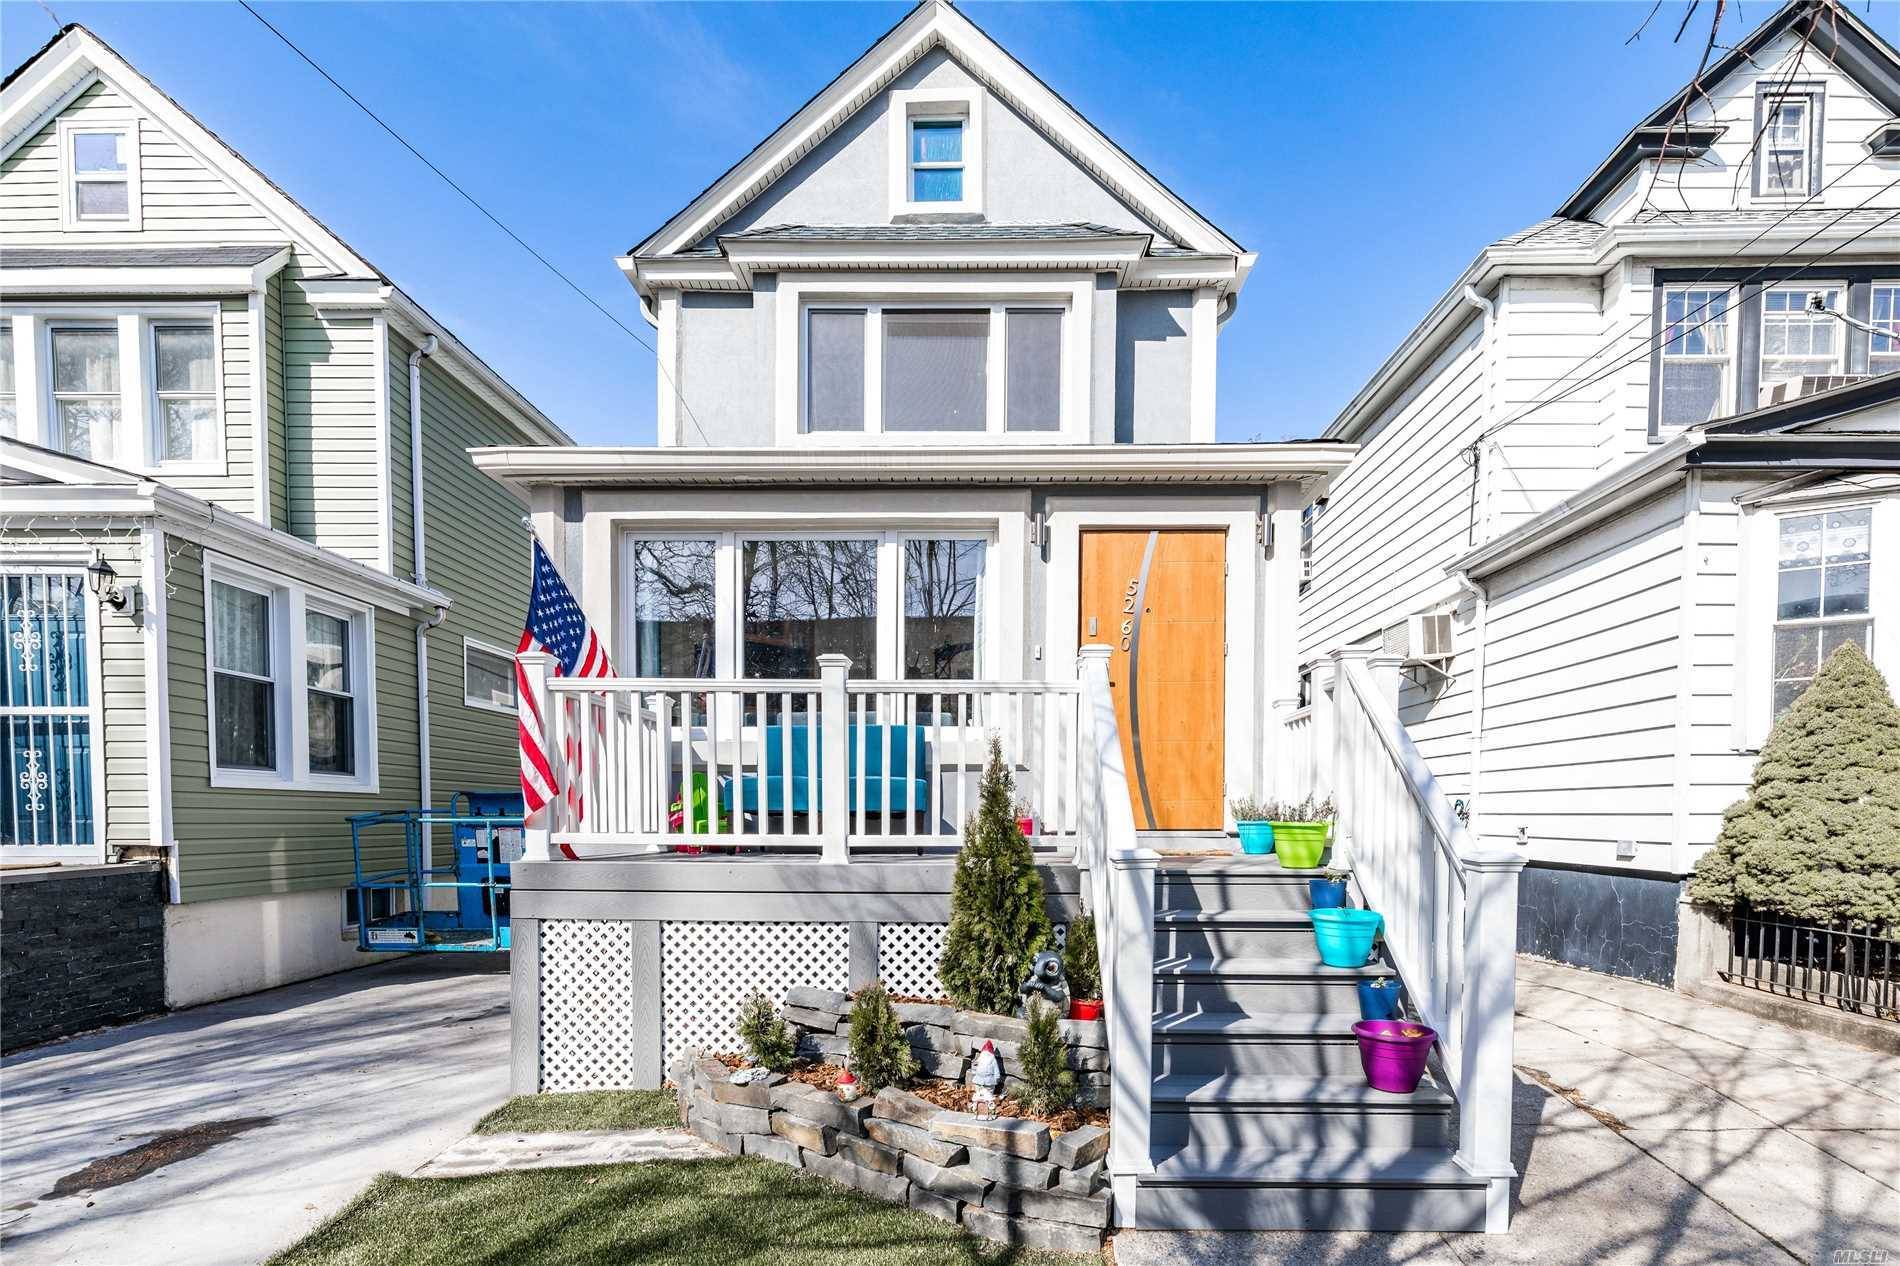 Excellent opportunity detached one family in the plateau completely renovated, new roof, new stucco, new windows new deck and concrete work, thats just the outside, 16x45 first floor and basement, ...